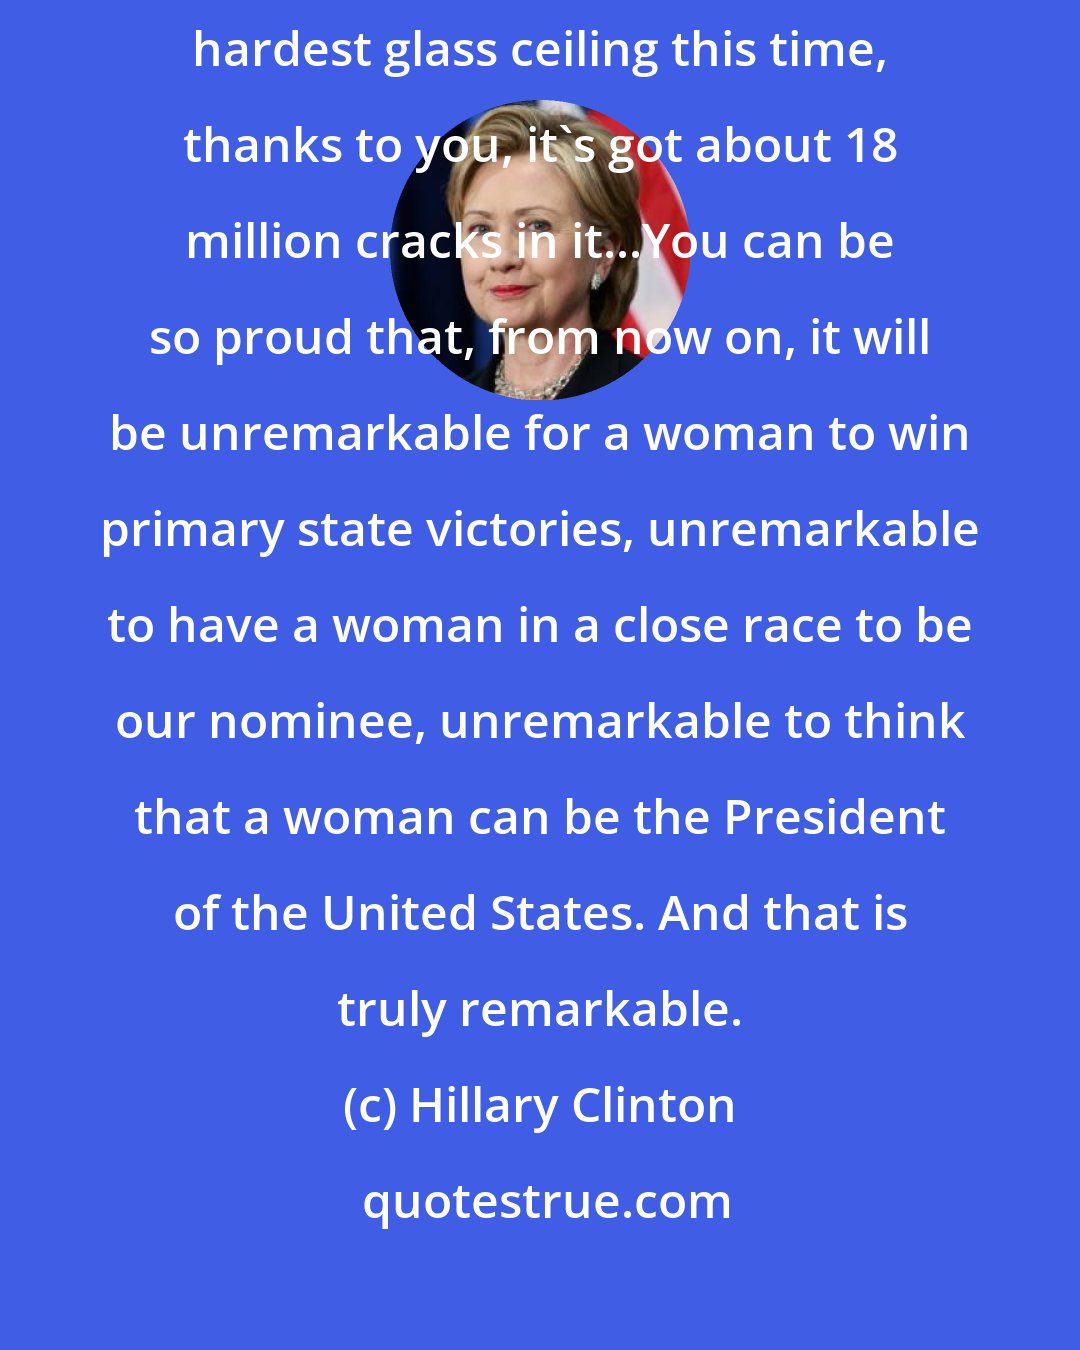 Hillary Clinton: From her concession speech: Although we weren't able to shatter that highest, hardest glass ceiling this time, thanks to you, it's got about 18 million cracks in it...You can be so proud that, from now on, it will be unremarkable for a woman to win primary state victories, unremarkable to have a woman in a close race to be our nominee, unremarkable to think that a woman can be the President of the United States. And that is truly remarkable.